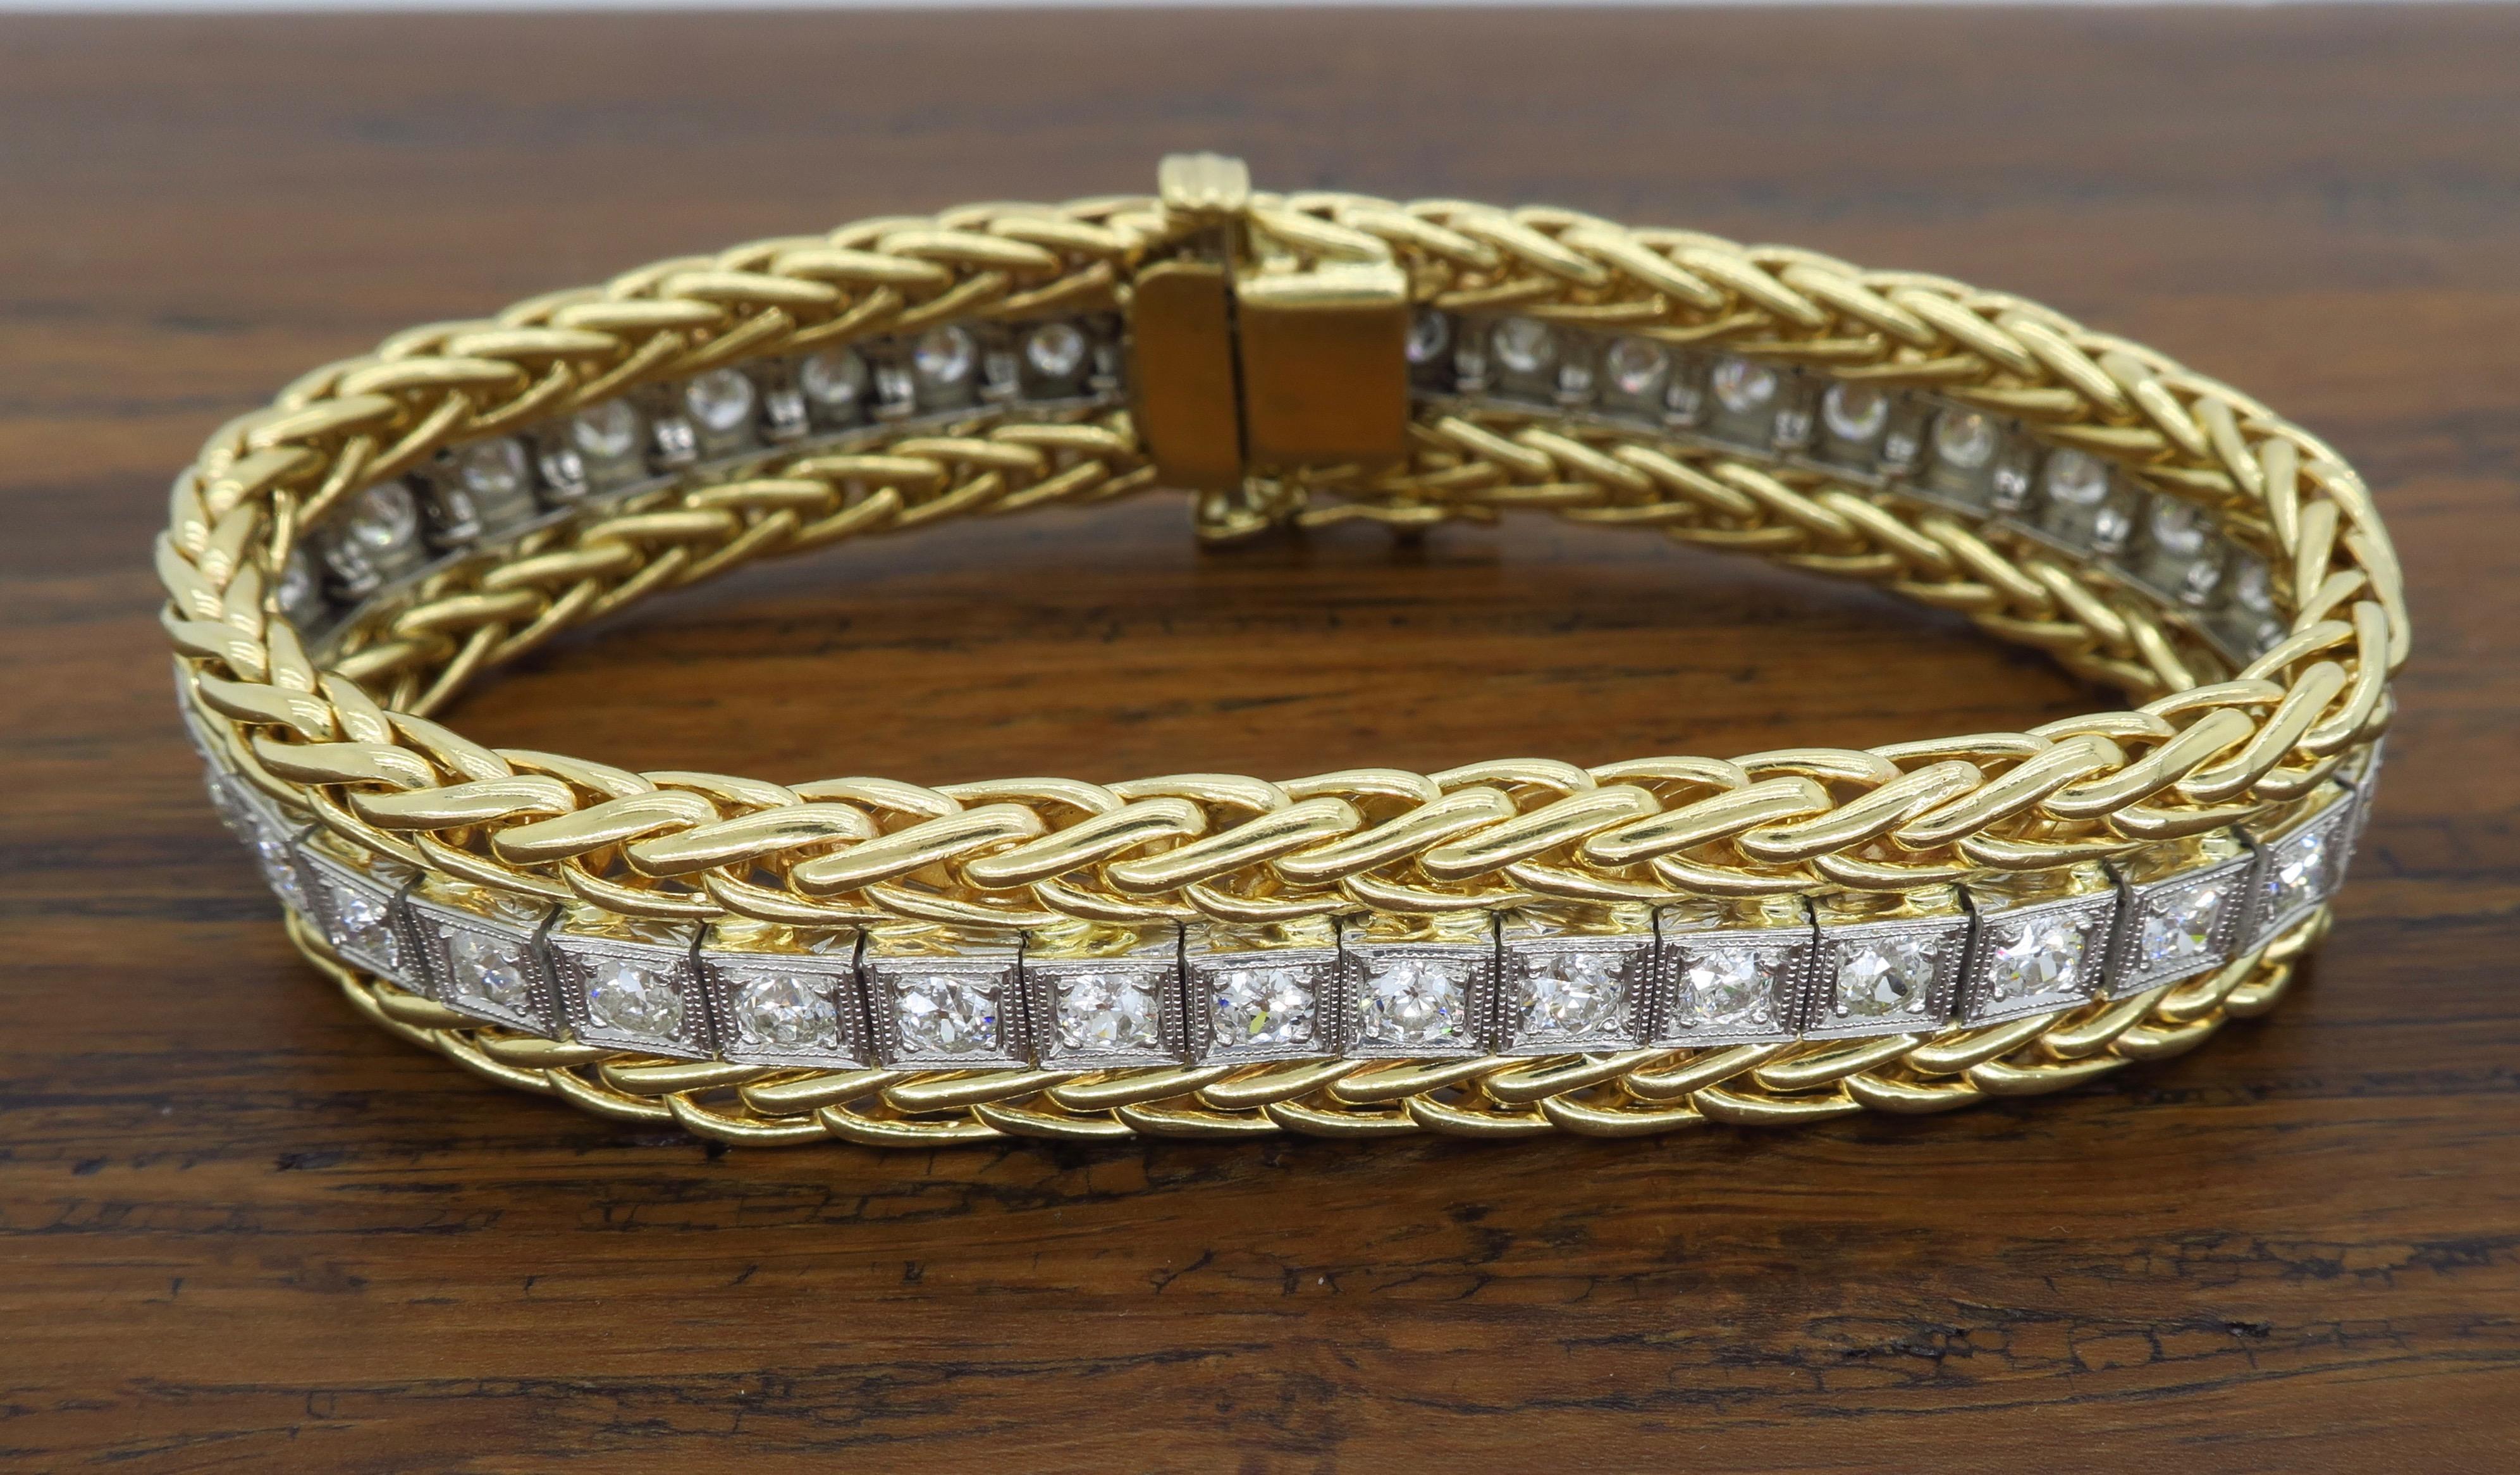 Vintage Diamond Line Bracelet in White and Yellow Gold 1